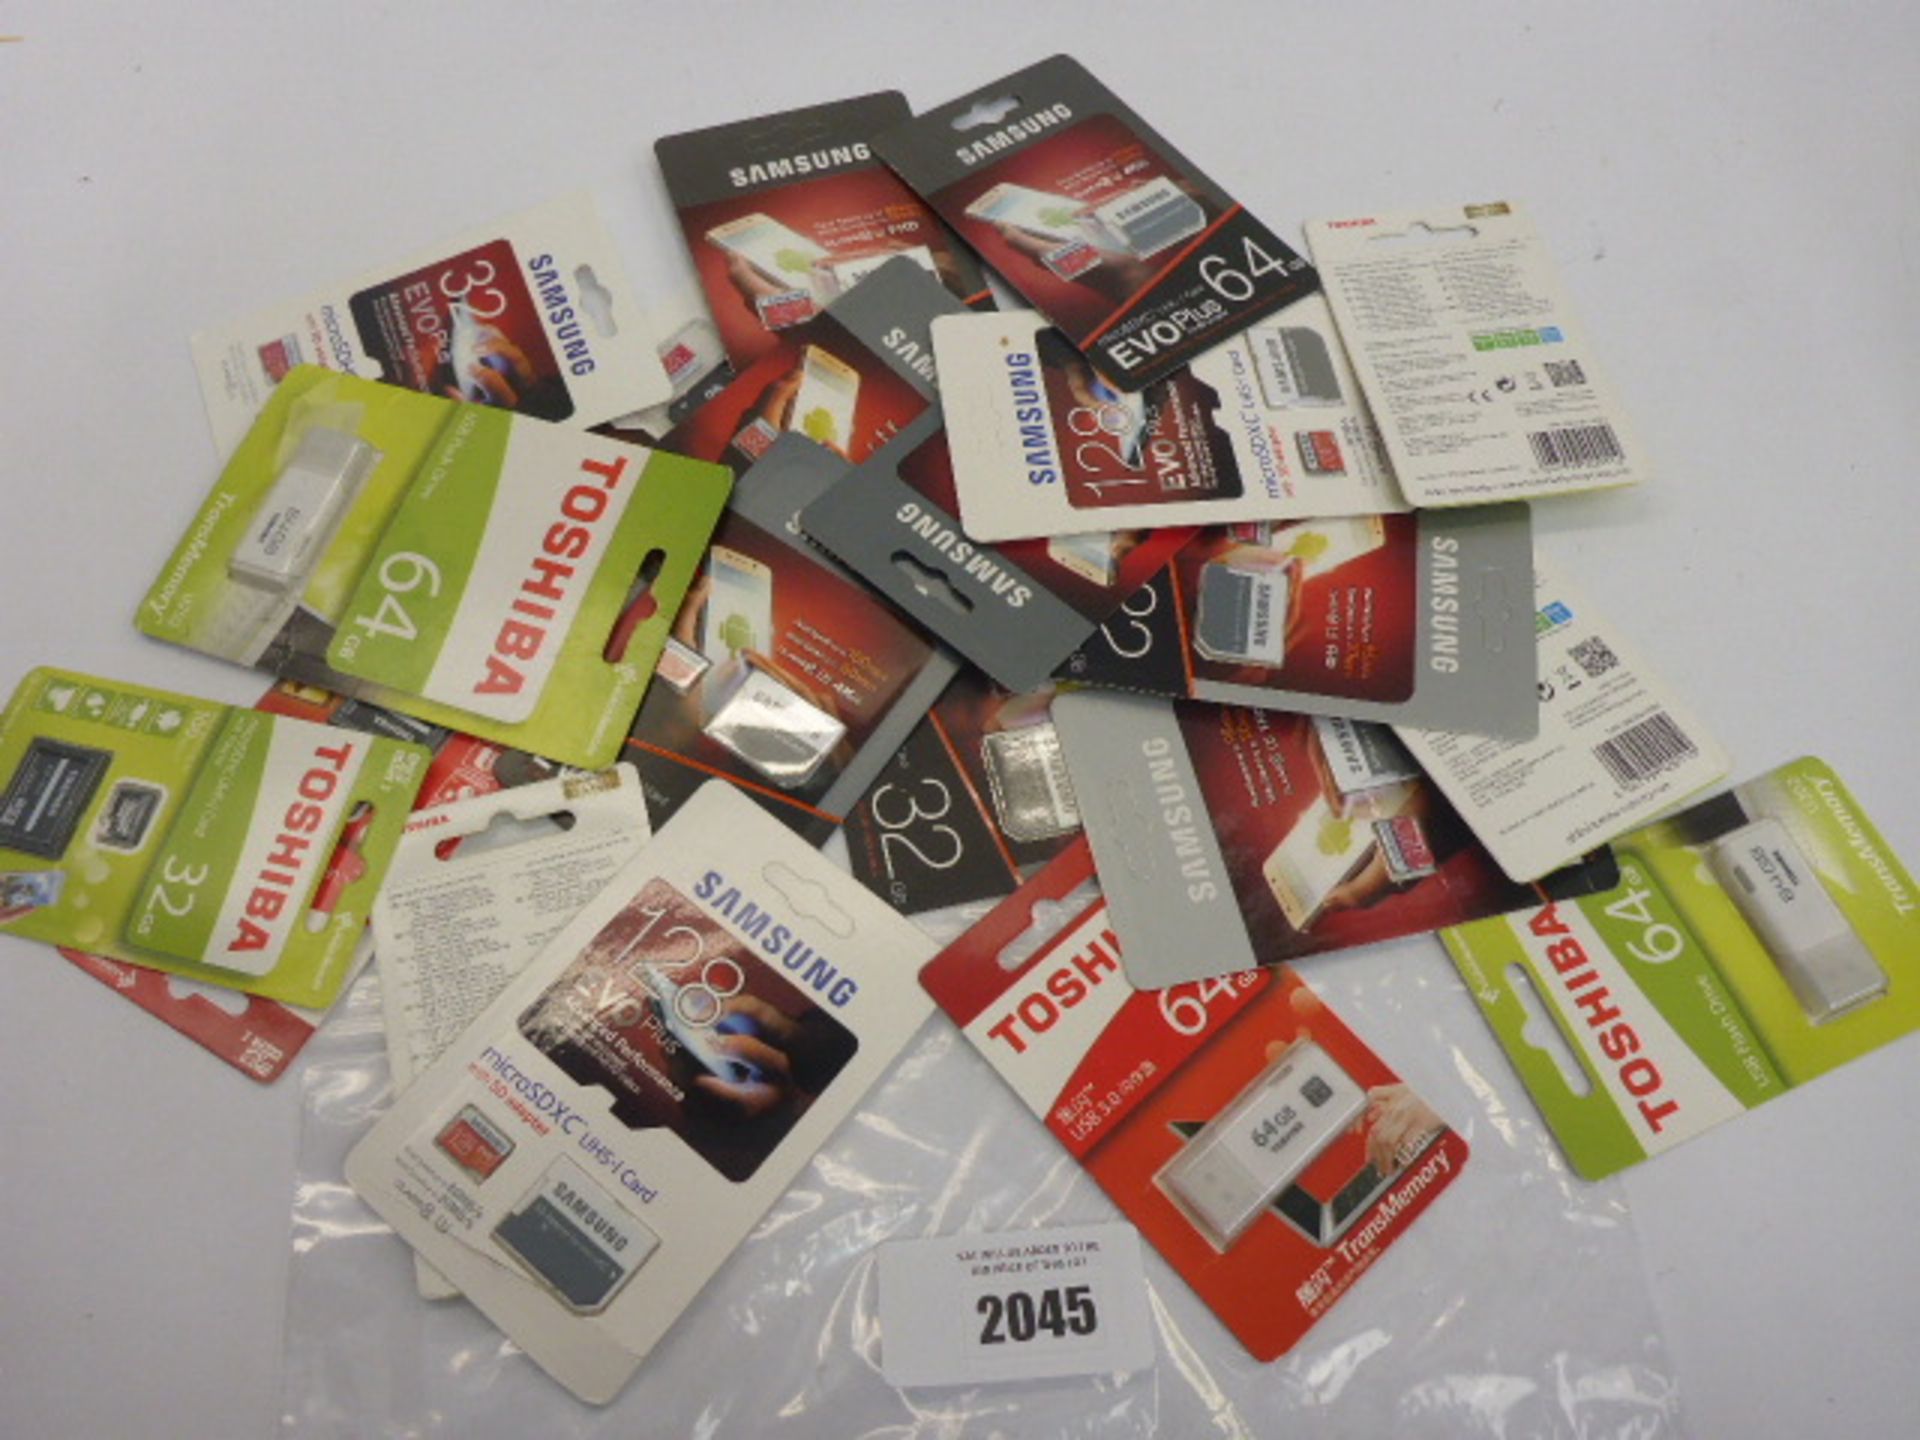 Quantity of Samsung and Toshiba flash drives and microSD cards